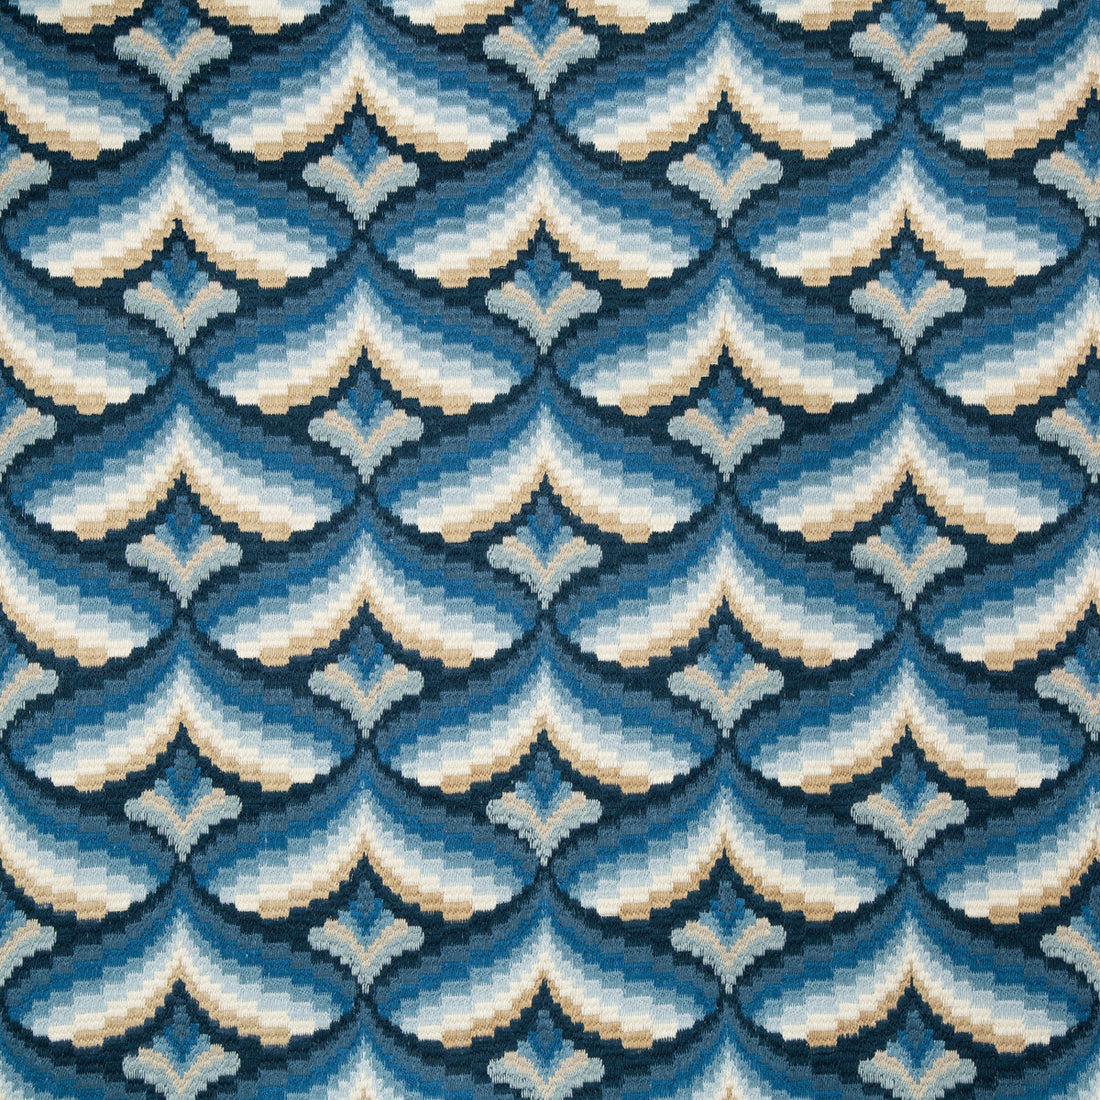 Giles Embroidery fabric in indigo color - pattern 2019106.155.0 - by Lee Jofa in the Manor House collection